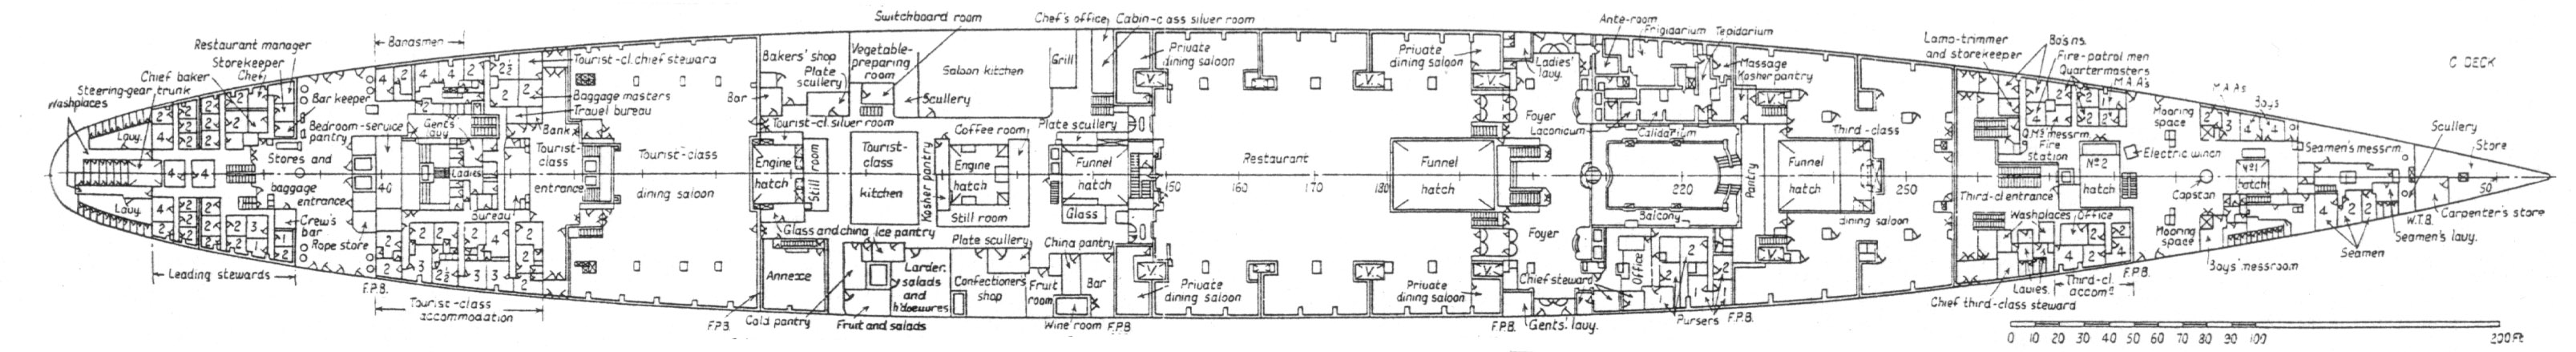 Queen Mary-R deck form C 7.jpg